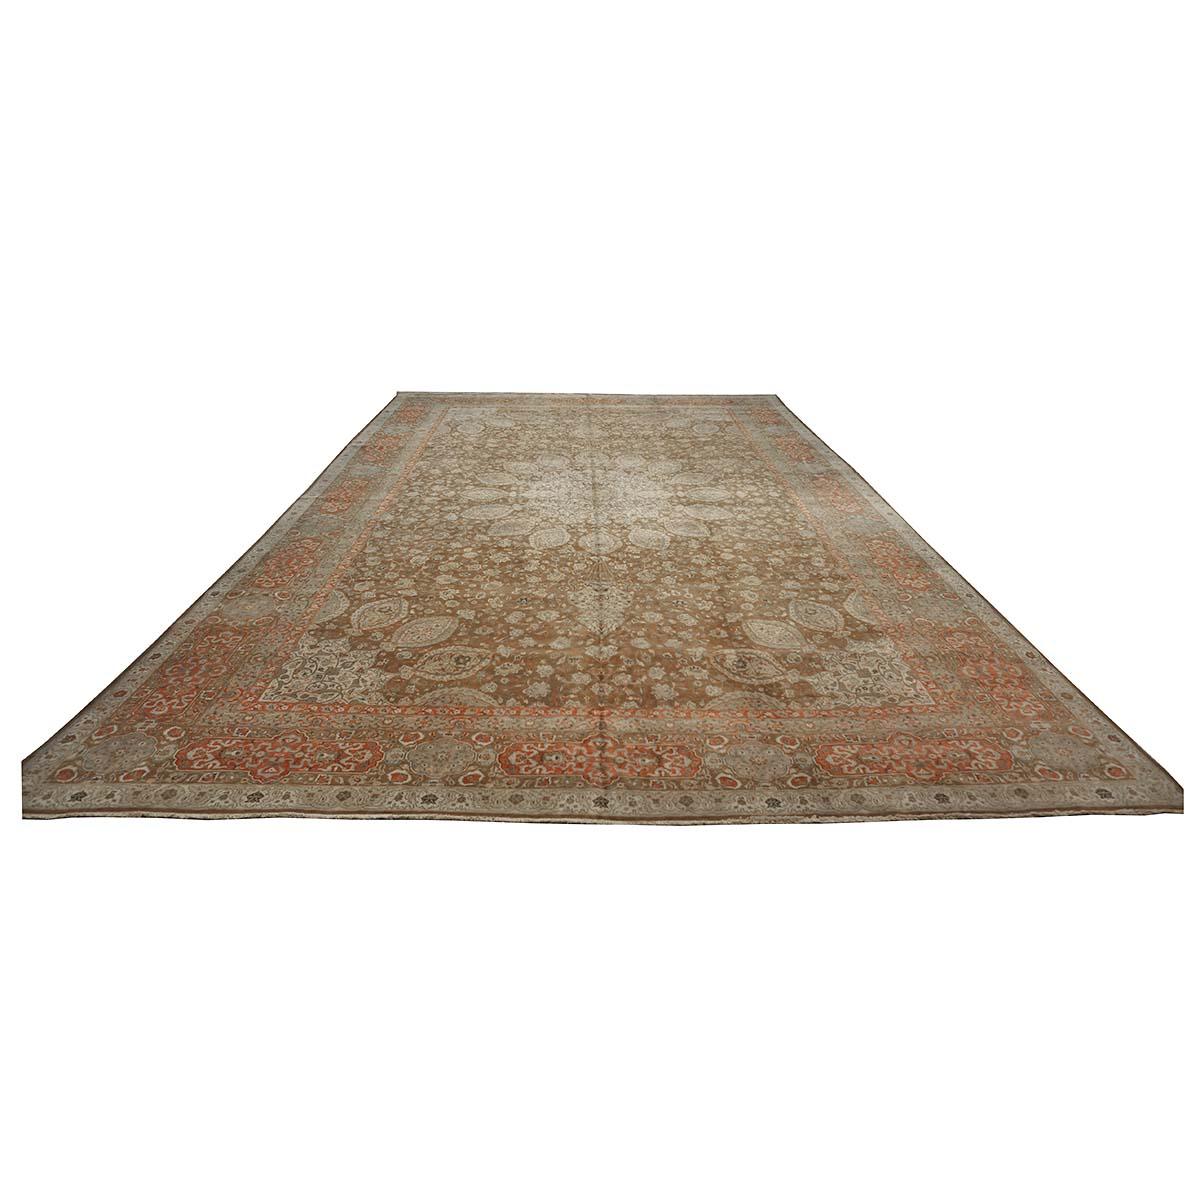 Ashly Fine Rugs presents a 1930s Antique Persian Tabriz 13x20 Oversized Wool Handmade Rug. Tabriz is a northern city in modern-day Iran and has forever been famous for the fineness and craftsmanship of its handmade rugs. This piece has a brown